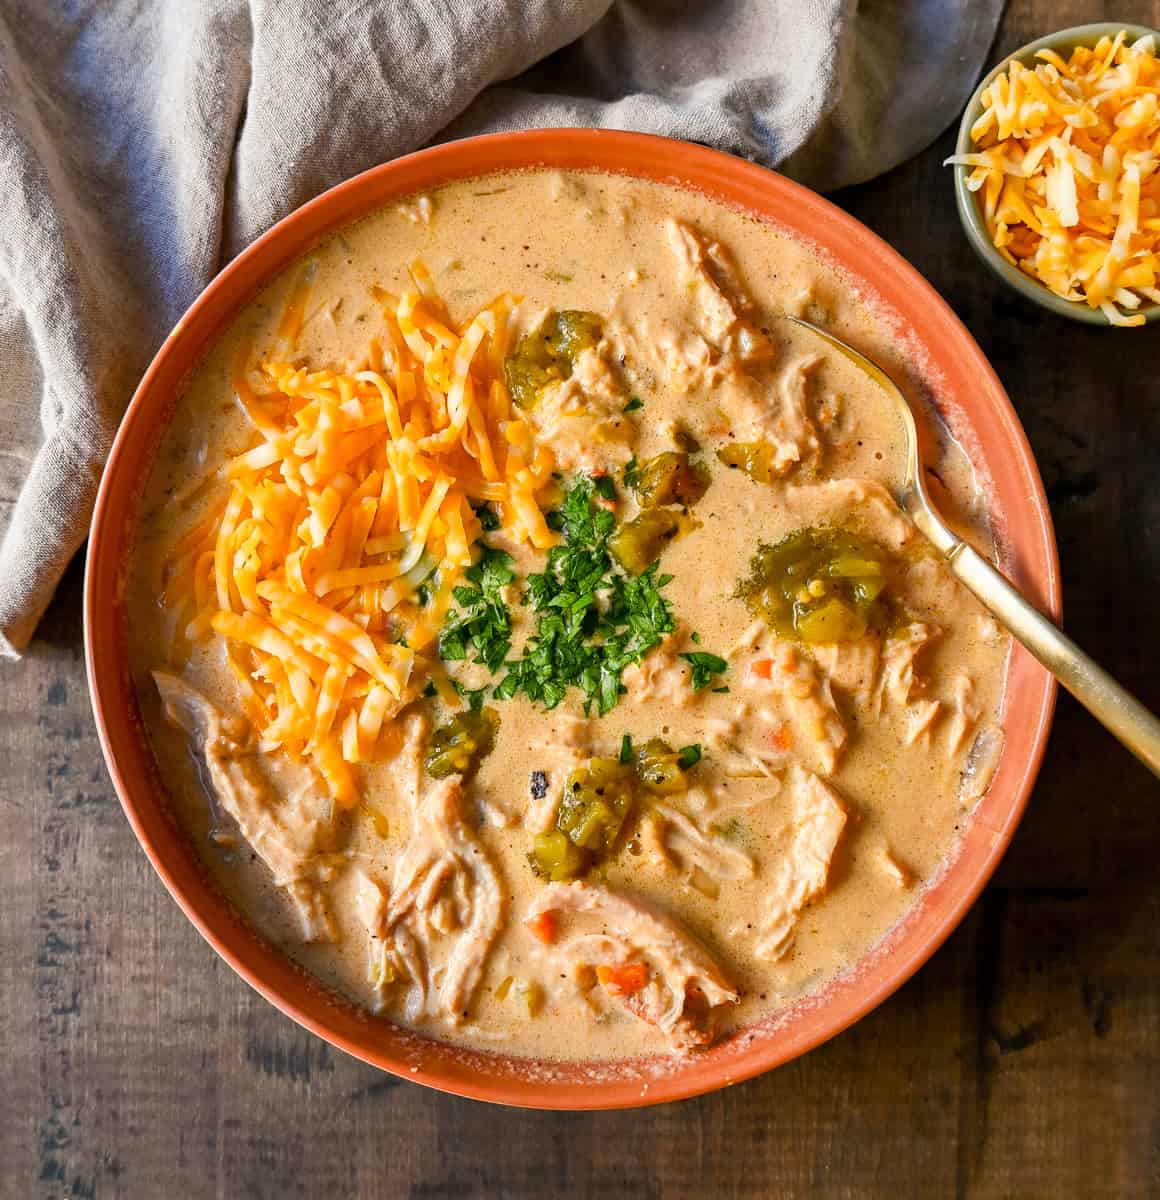 Rich, cheesy chicken queso soup made with three types of cheeses, tender chicken, green chiles, and spices—all the flavors of cheese queso but in a soup! The creamiest, most flavorful Chicken Cheese Soup.